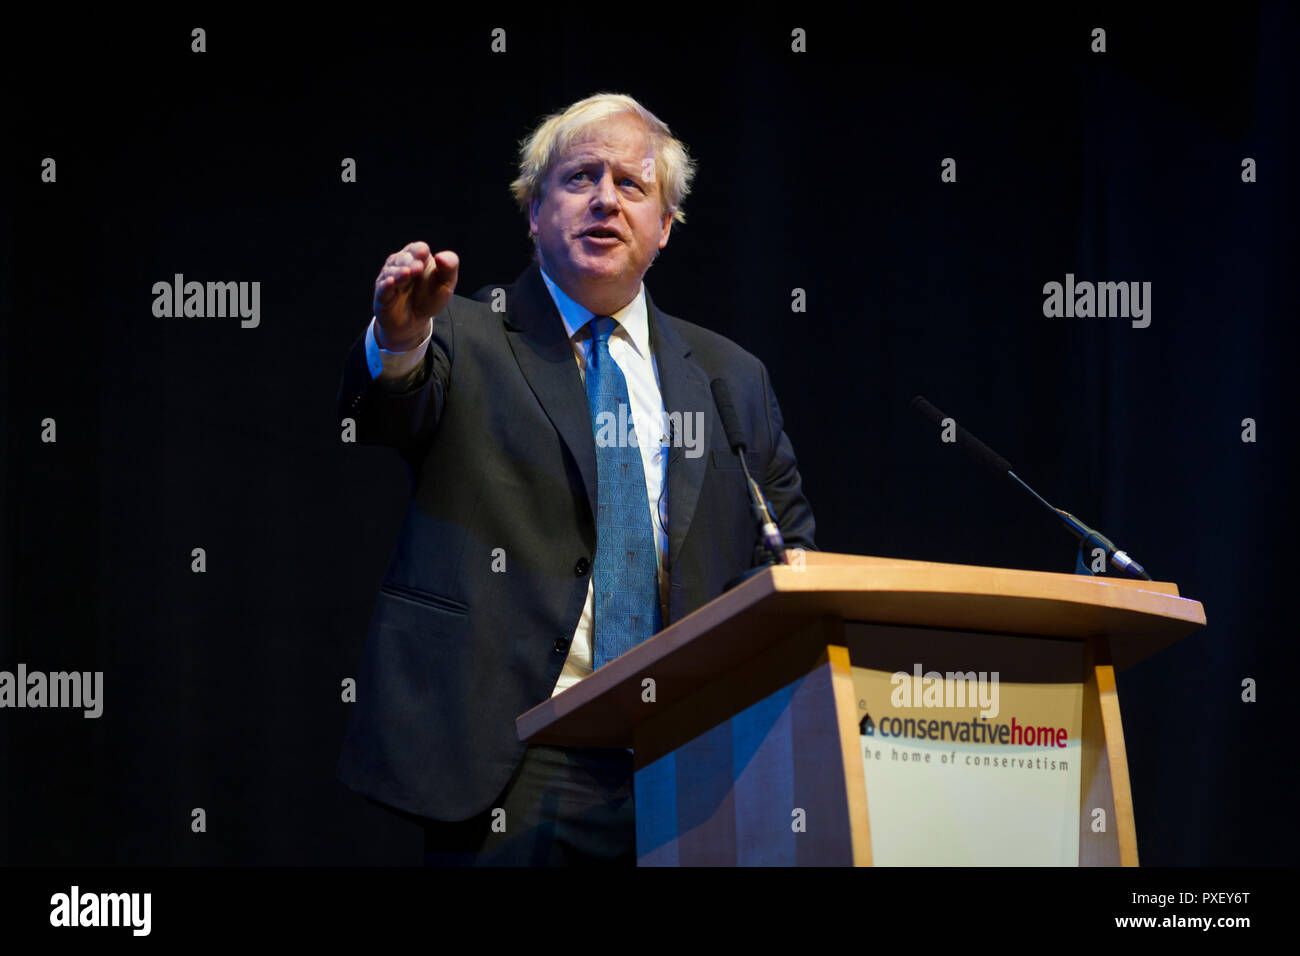 © Chris Bull. 2/10/18 BIRMINGHAM    , UK.   Conservative Party conference at the ICC in Birmingham , England , today (Tuesday 2nd Oct 2018).  Boris Johnson speaks at a Conservative Home fringe event. During the speech he launched an attack on May's Brexit plan and on the policies of the Labour Party.    Photo credit: CHRIS BULL Stock Photo